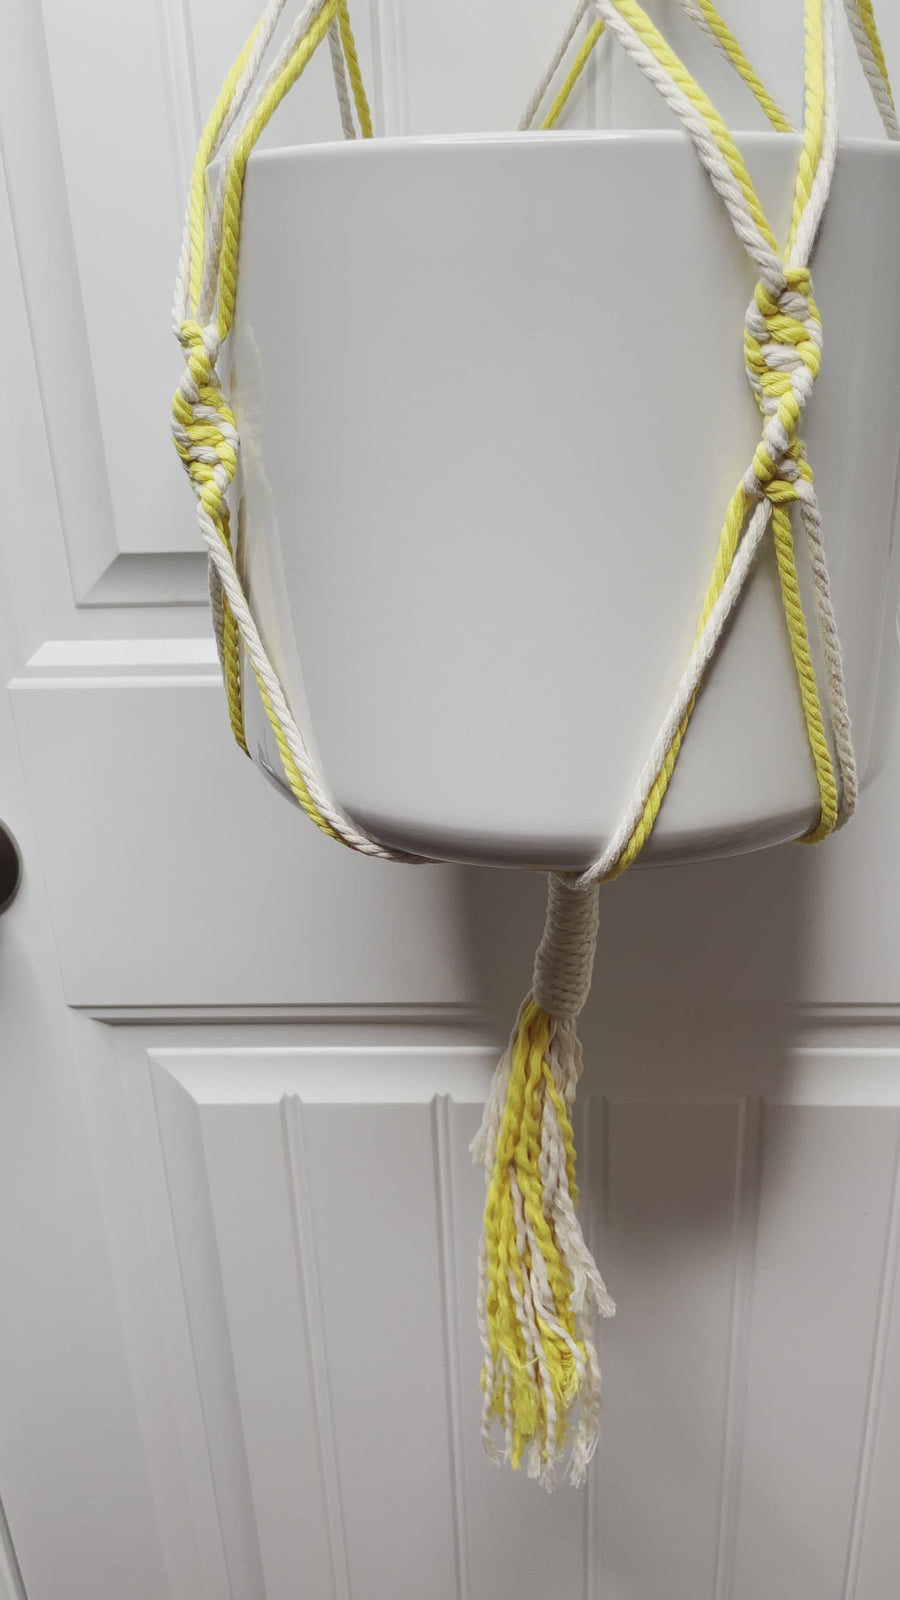 Gussette Multi-Colored Beaded Hanging Planter